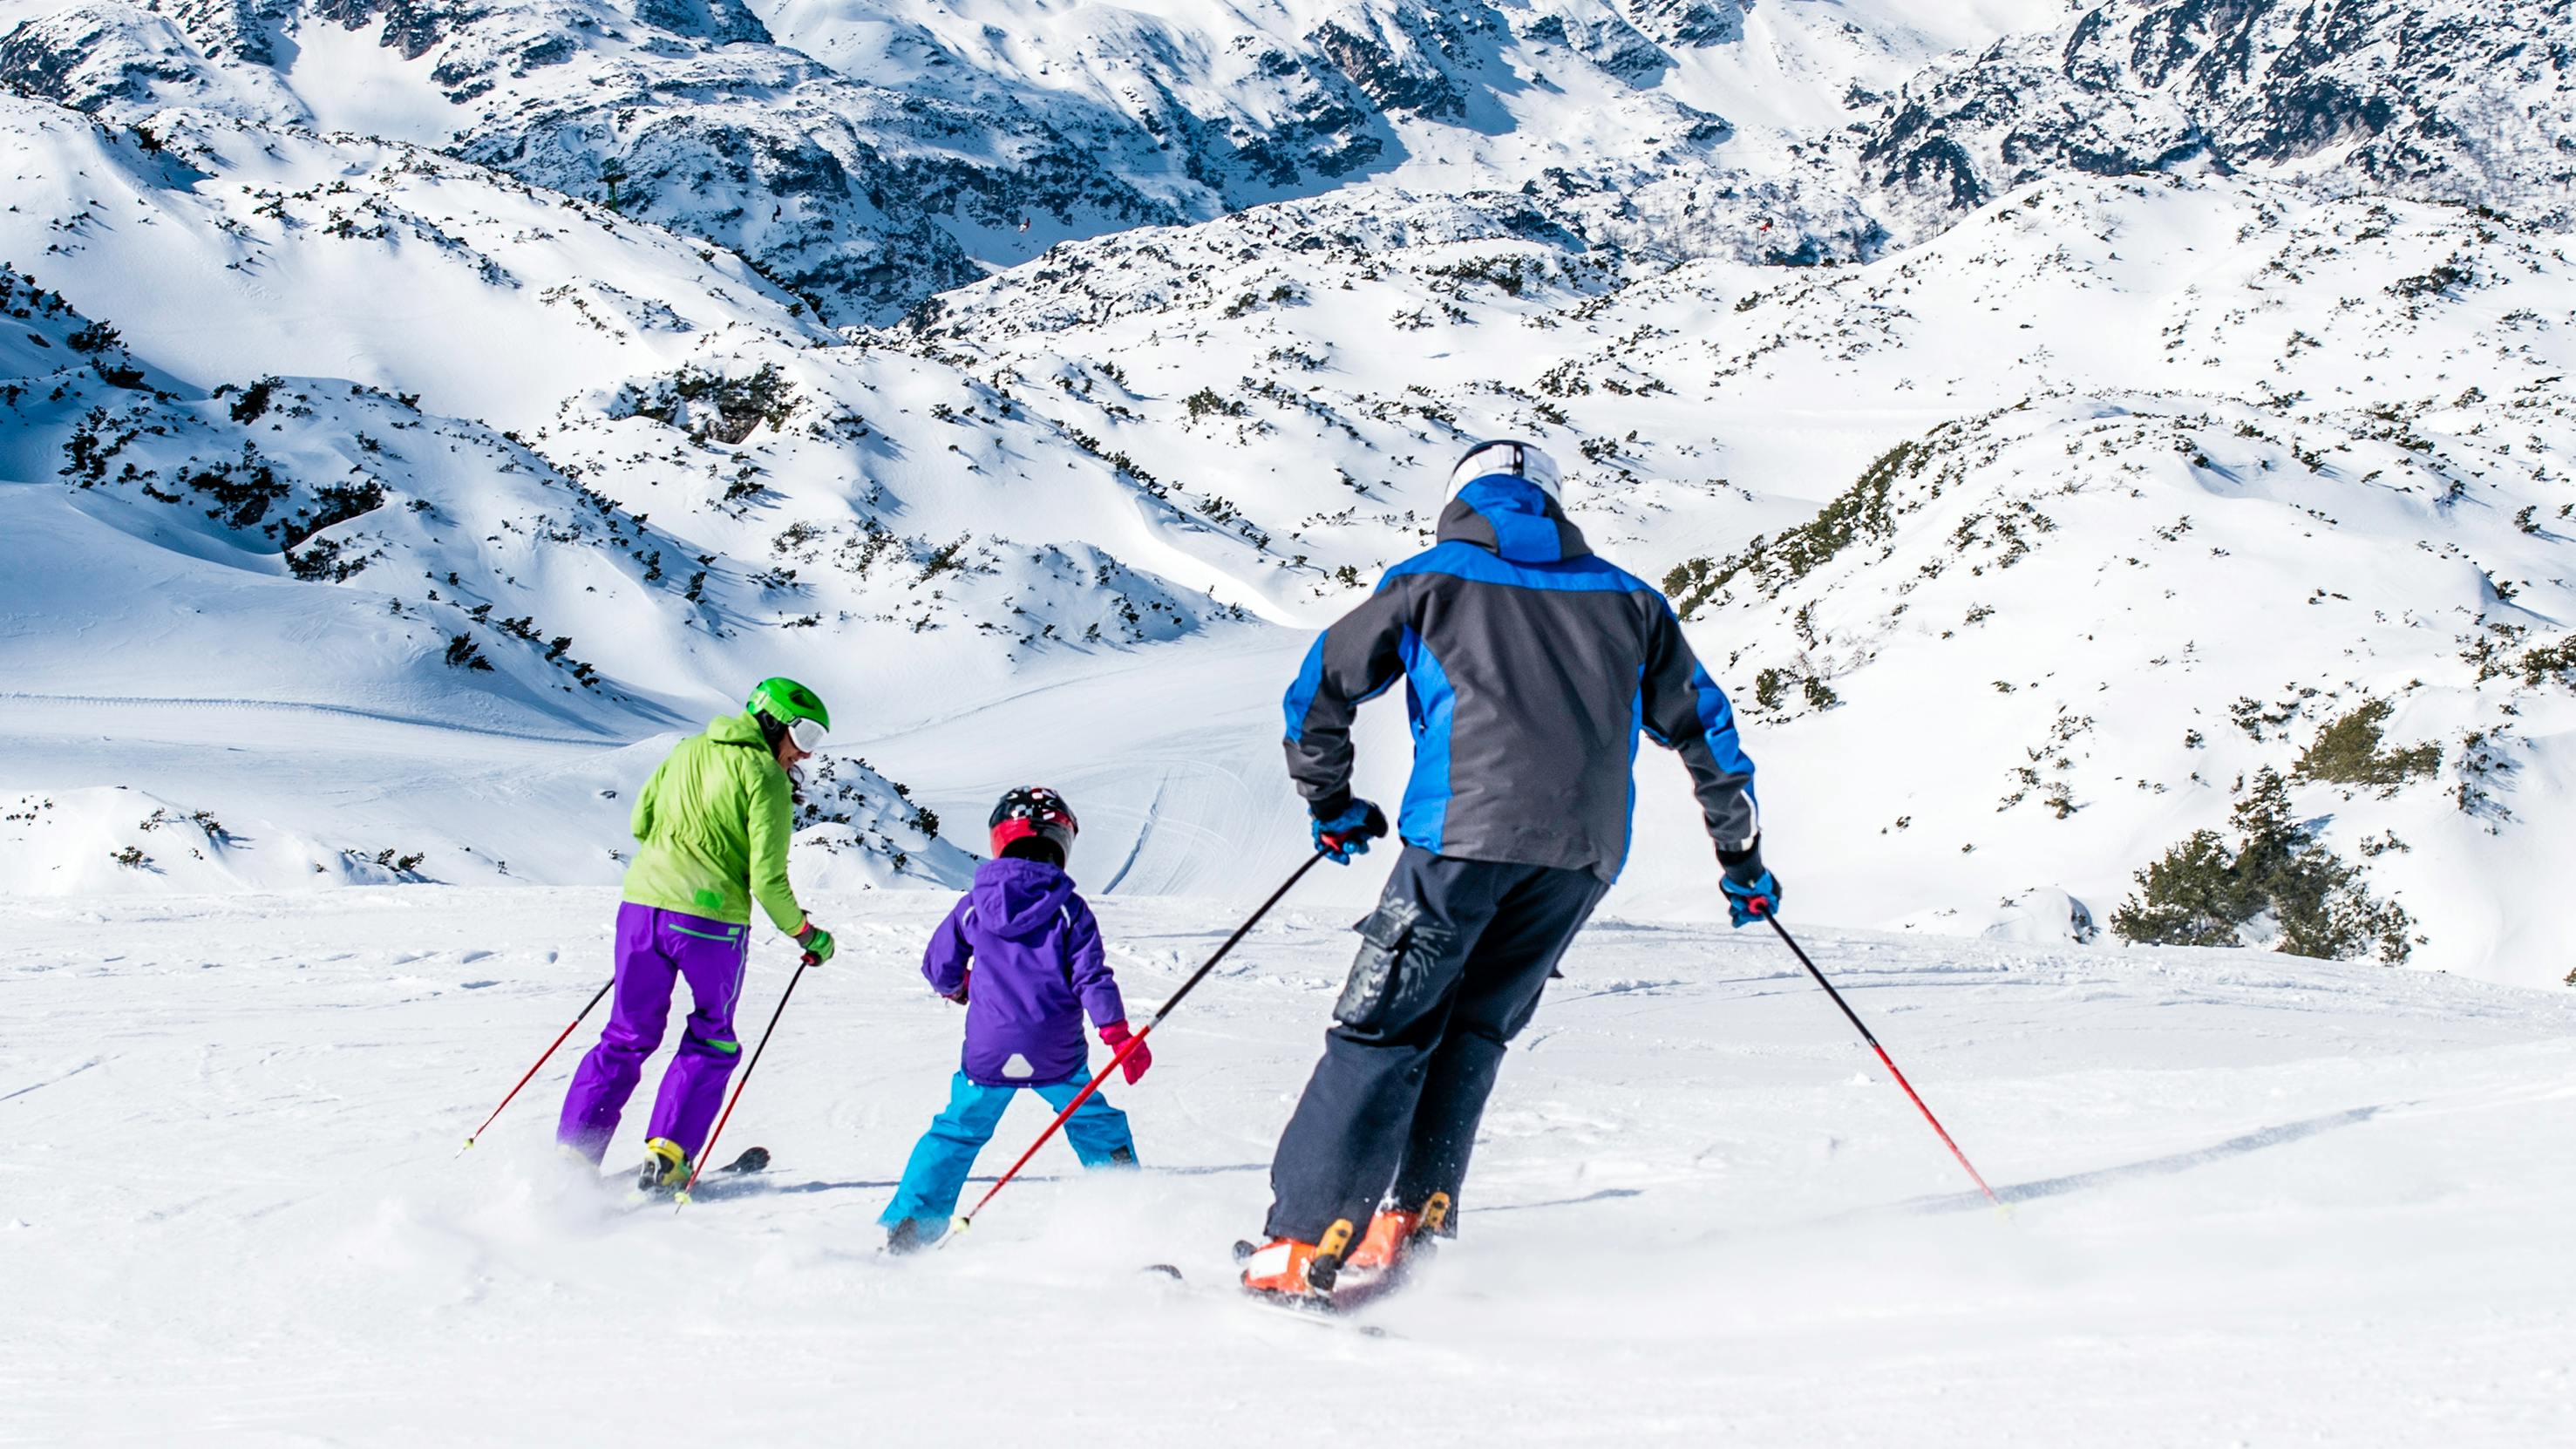 A man, woman, and child ski on a snowy hill